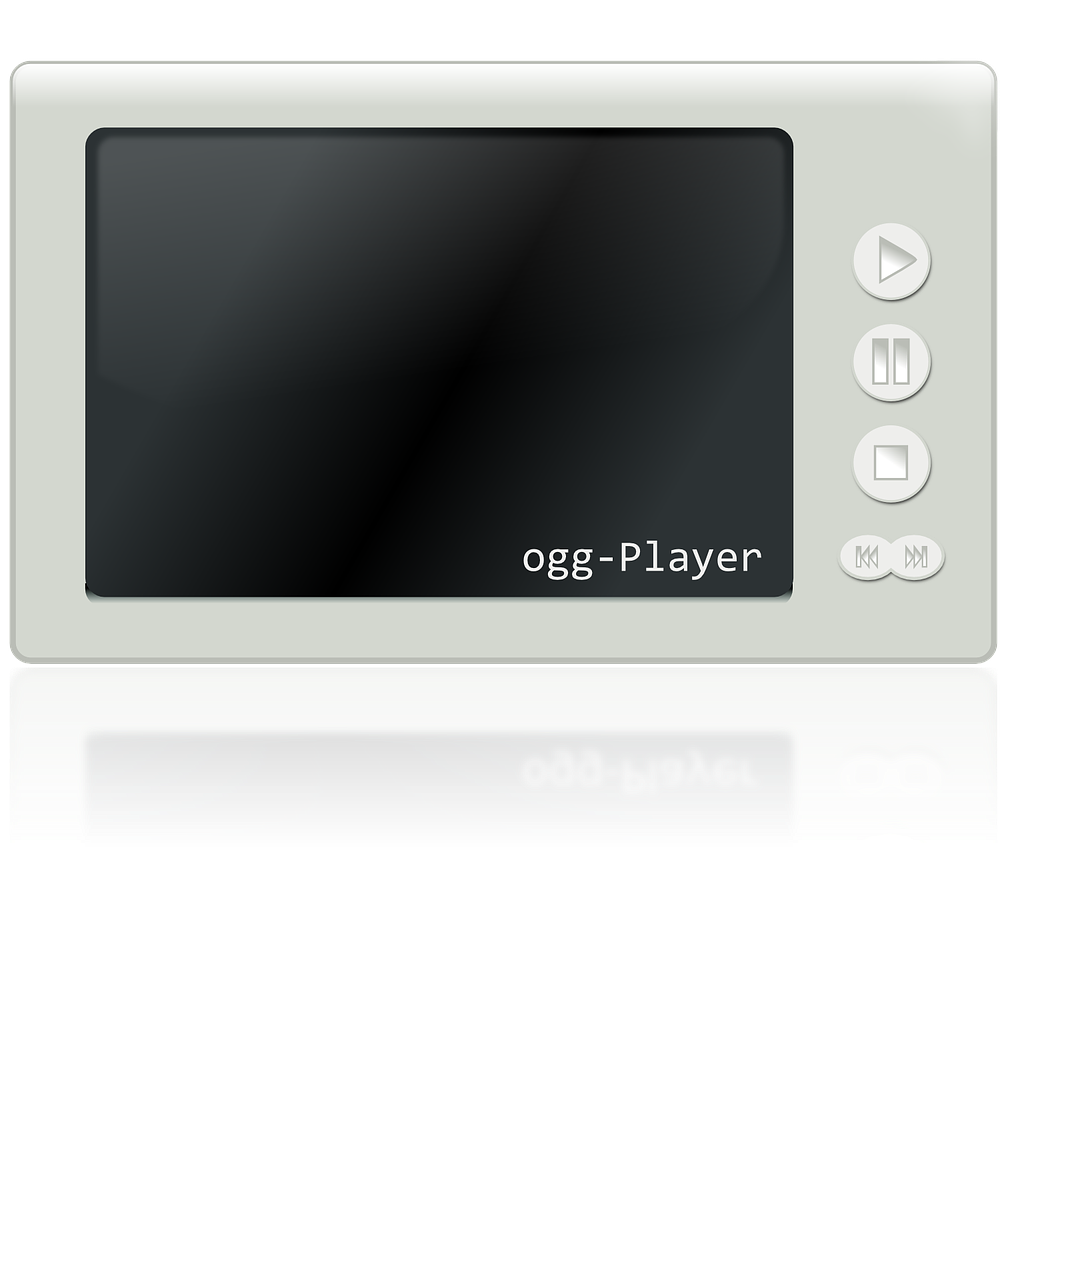 mp3-player player device free photo